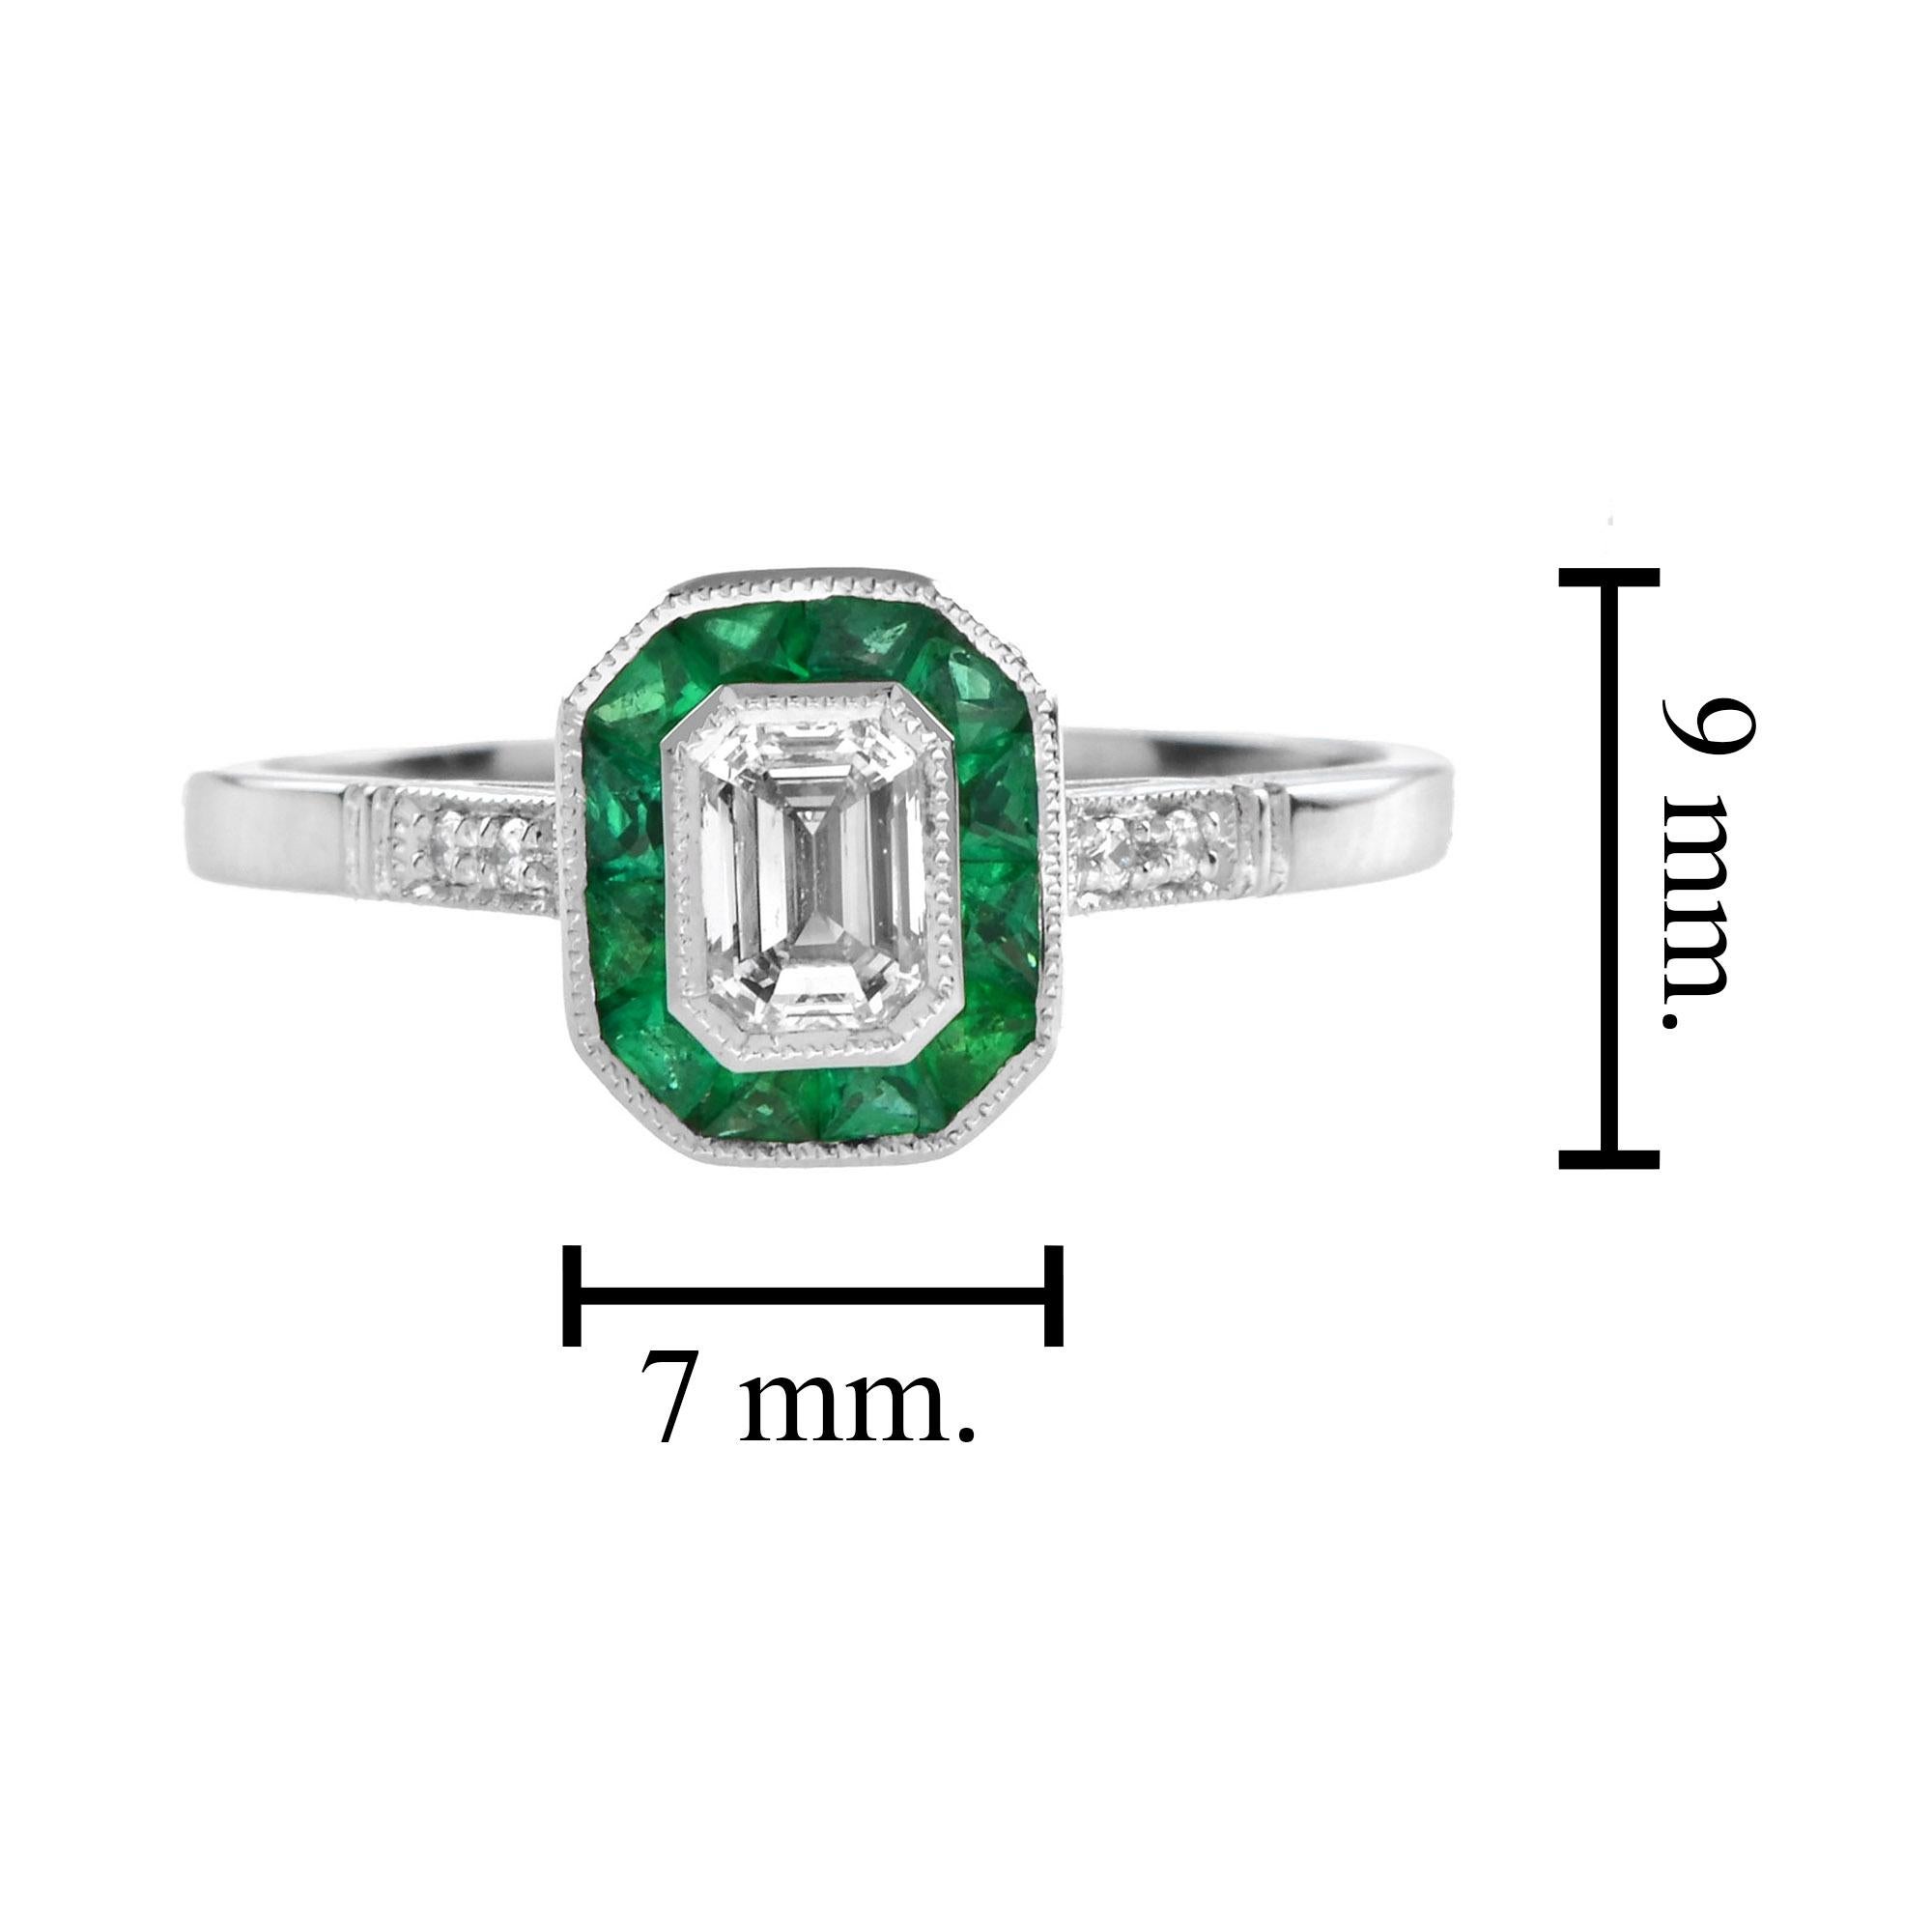 For Sale:  Emerald Cut Diamond and Emerald Art Deco Style Engagement Ring in 18K White Gold 7